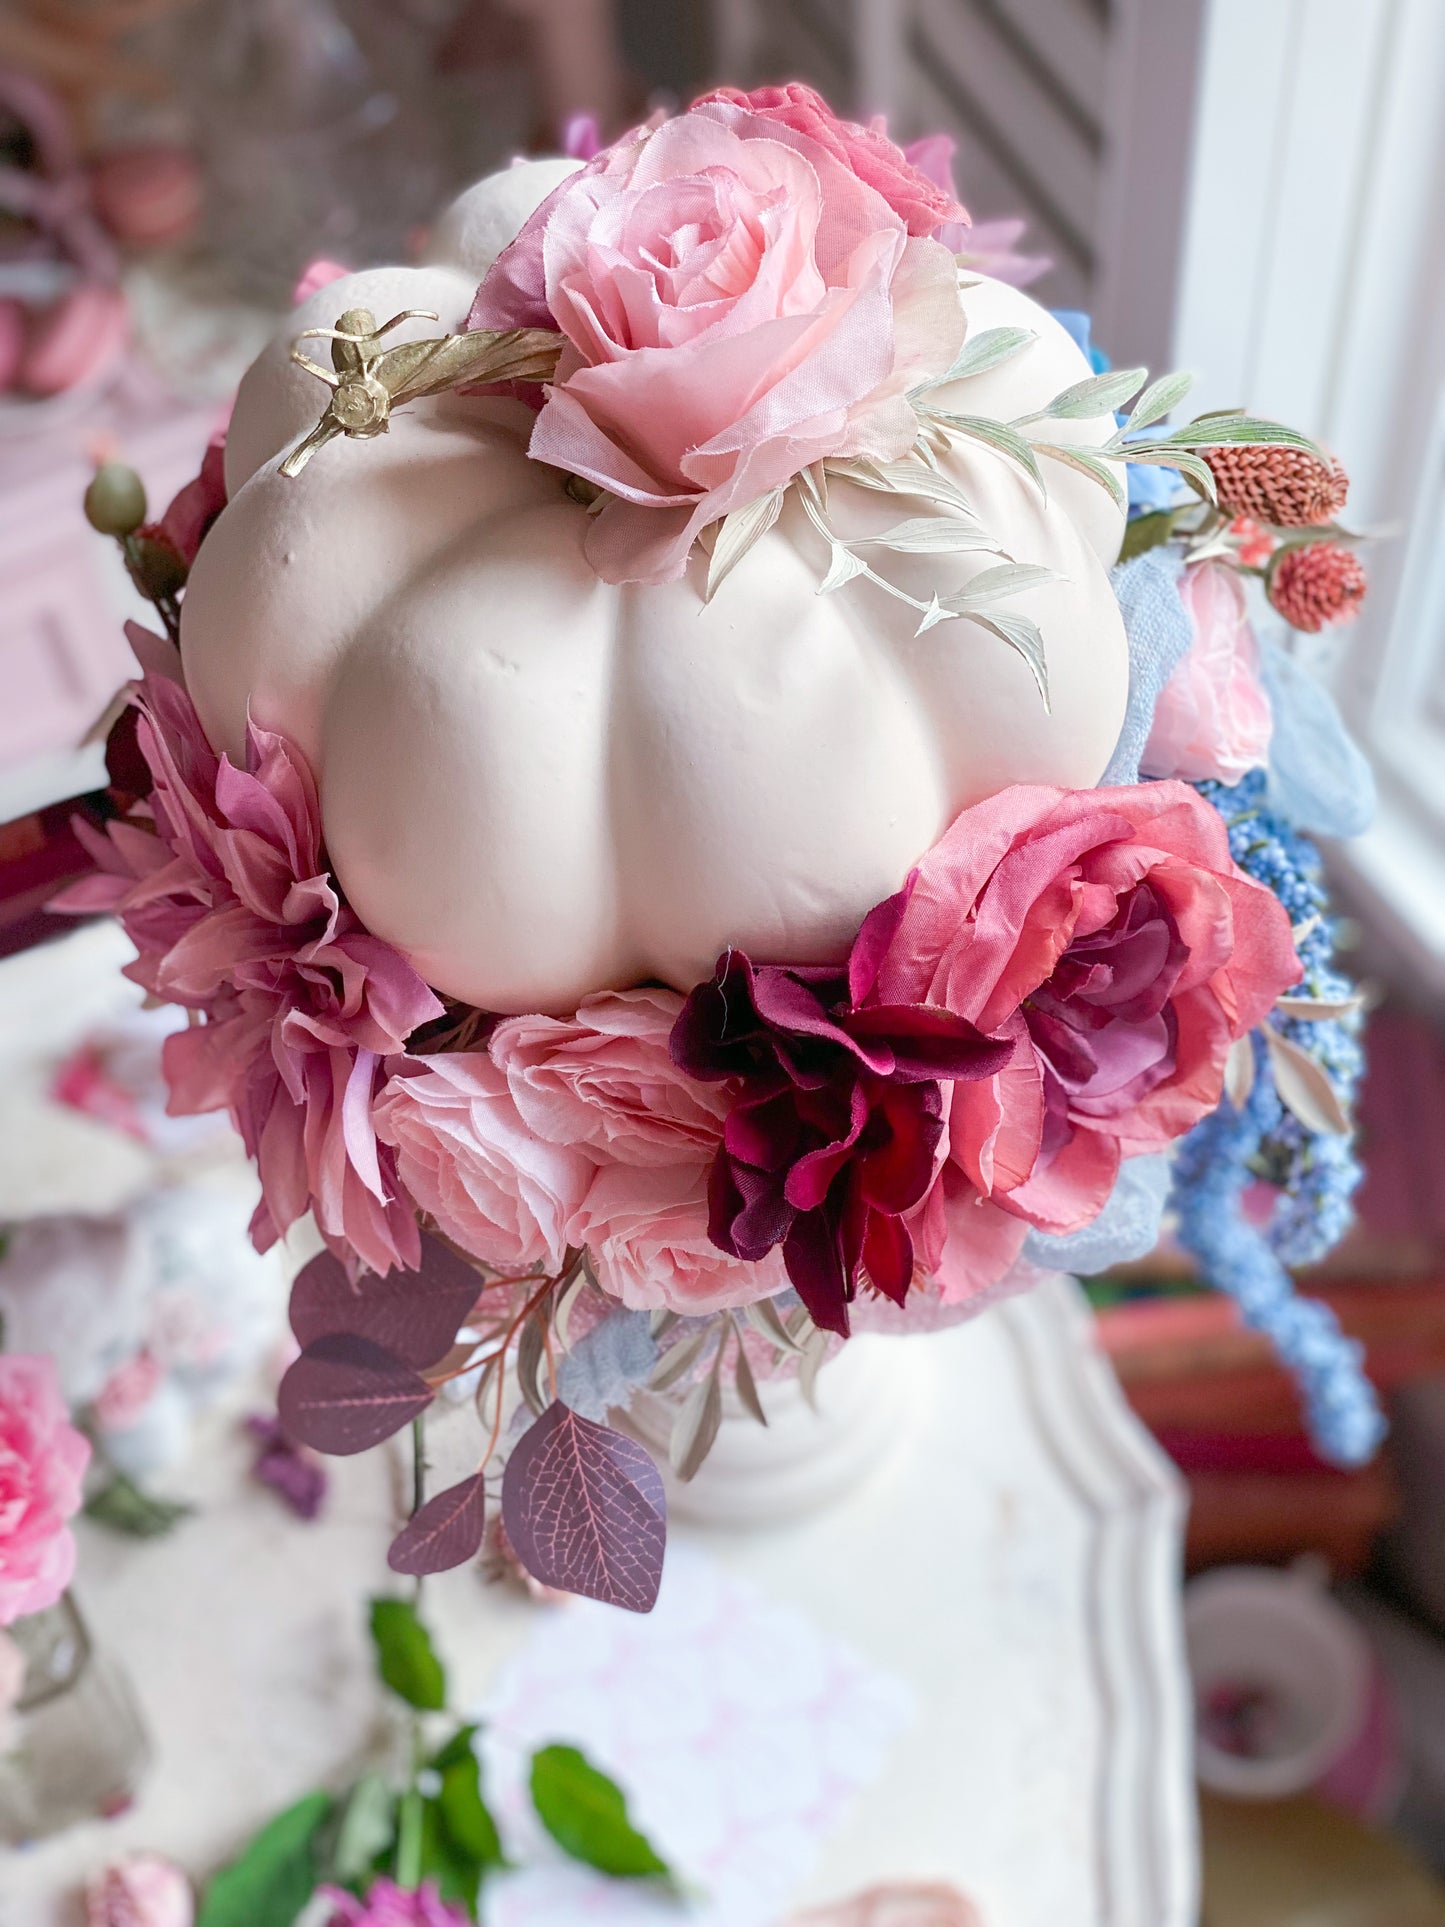 Bespoke Upcycled Pastel Cream, Pink and Blue Glam Glitter Pumpkin Topiary